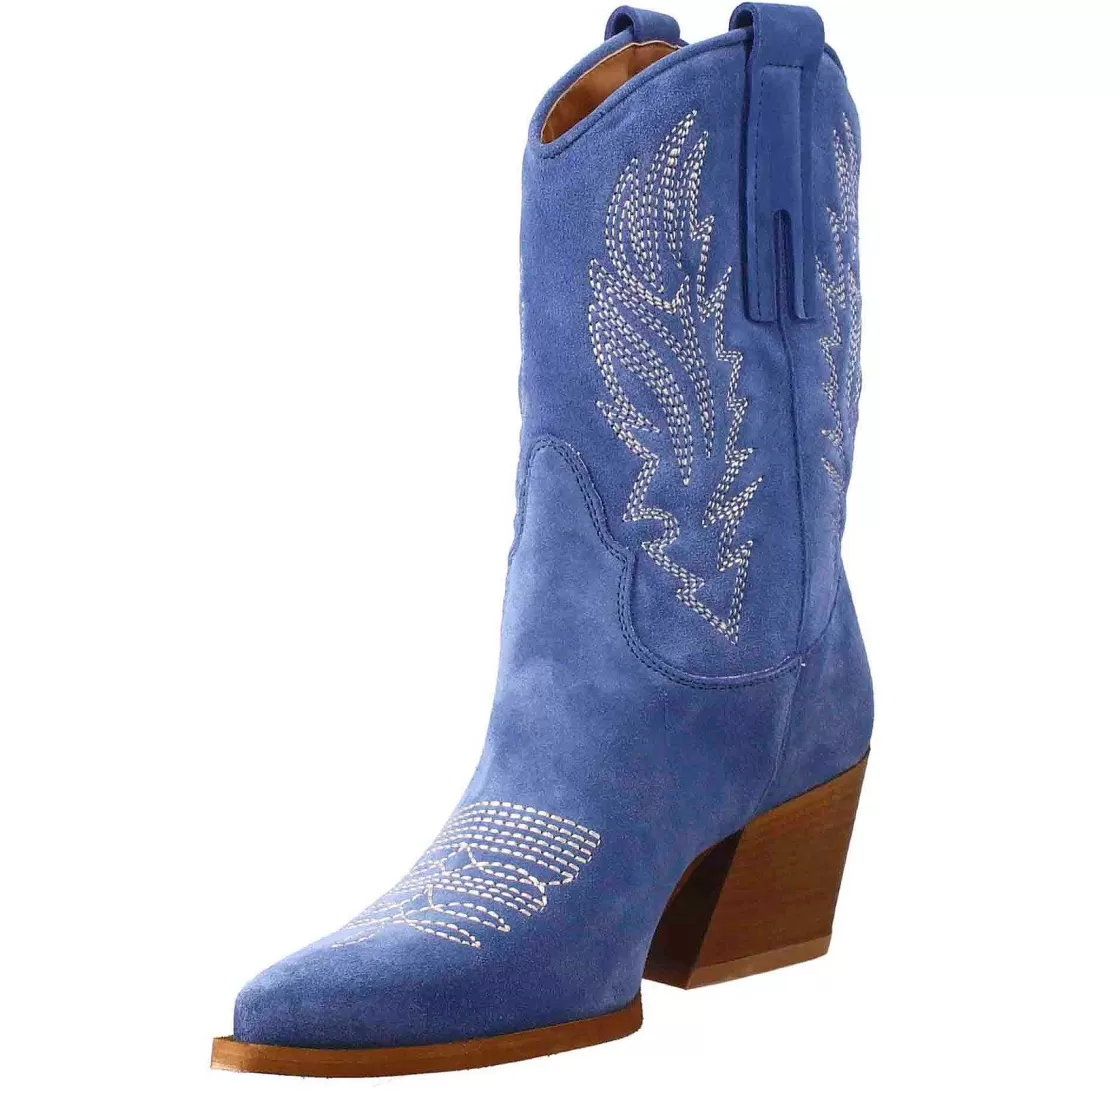 Leonardo Texan Women'S Ankle Boot In Light Blue Suede With Embroidery. Discount